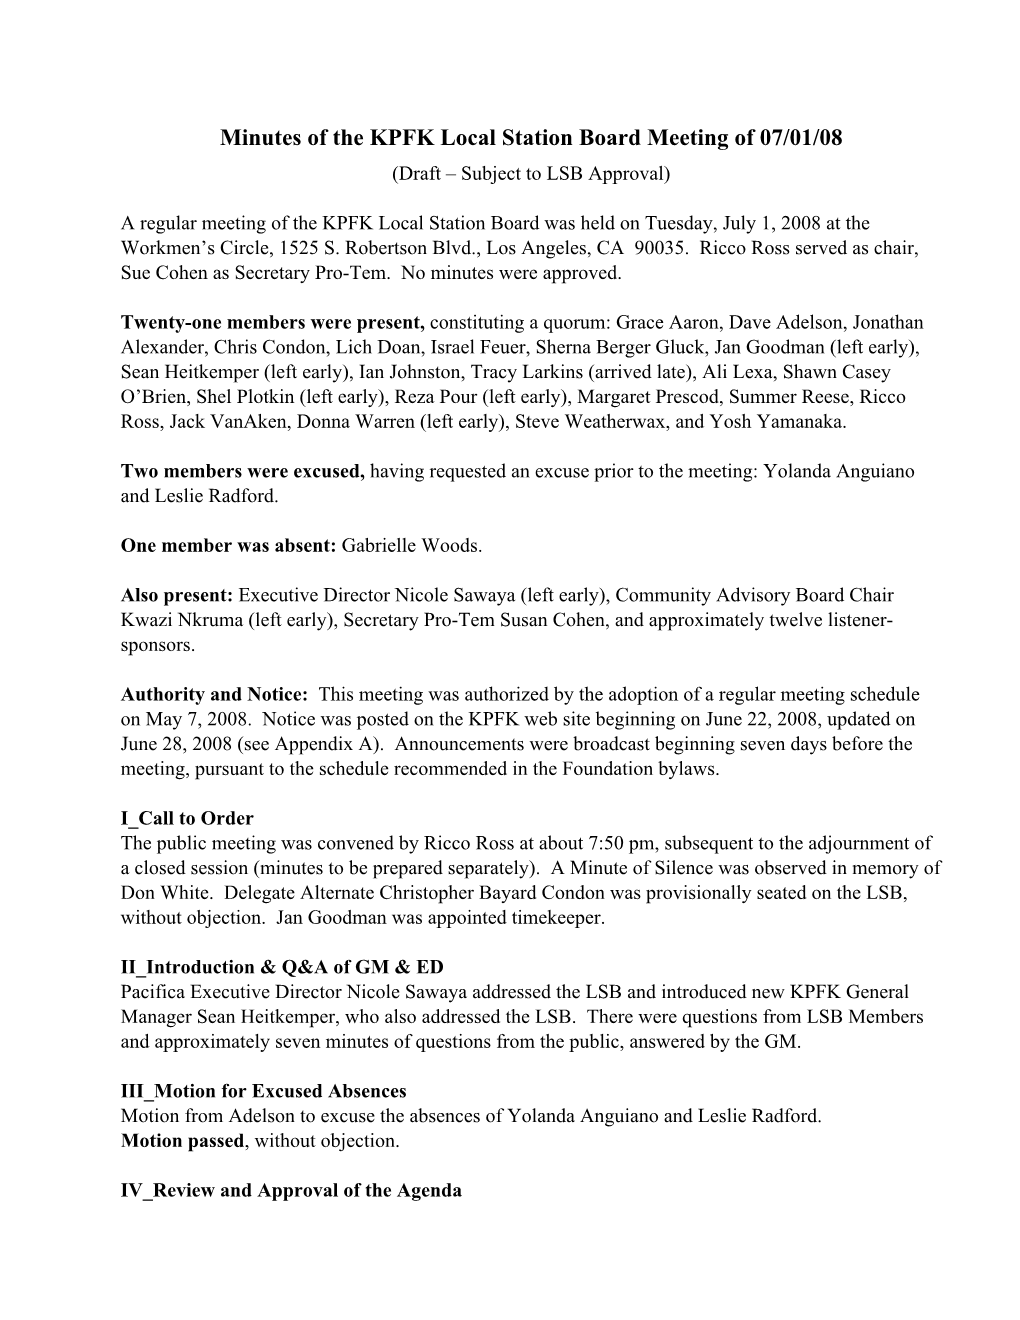 Minutes of the KPFK Local Station Board Meeting of 07/01/08 (Draft – Subject to LSB Approval)